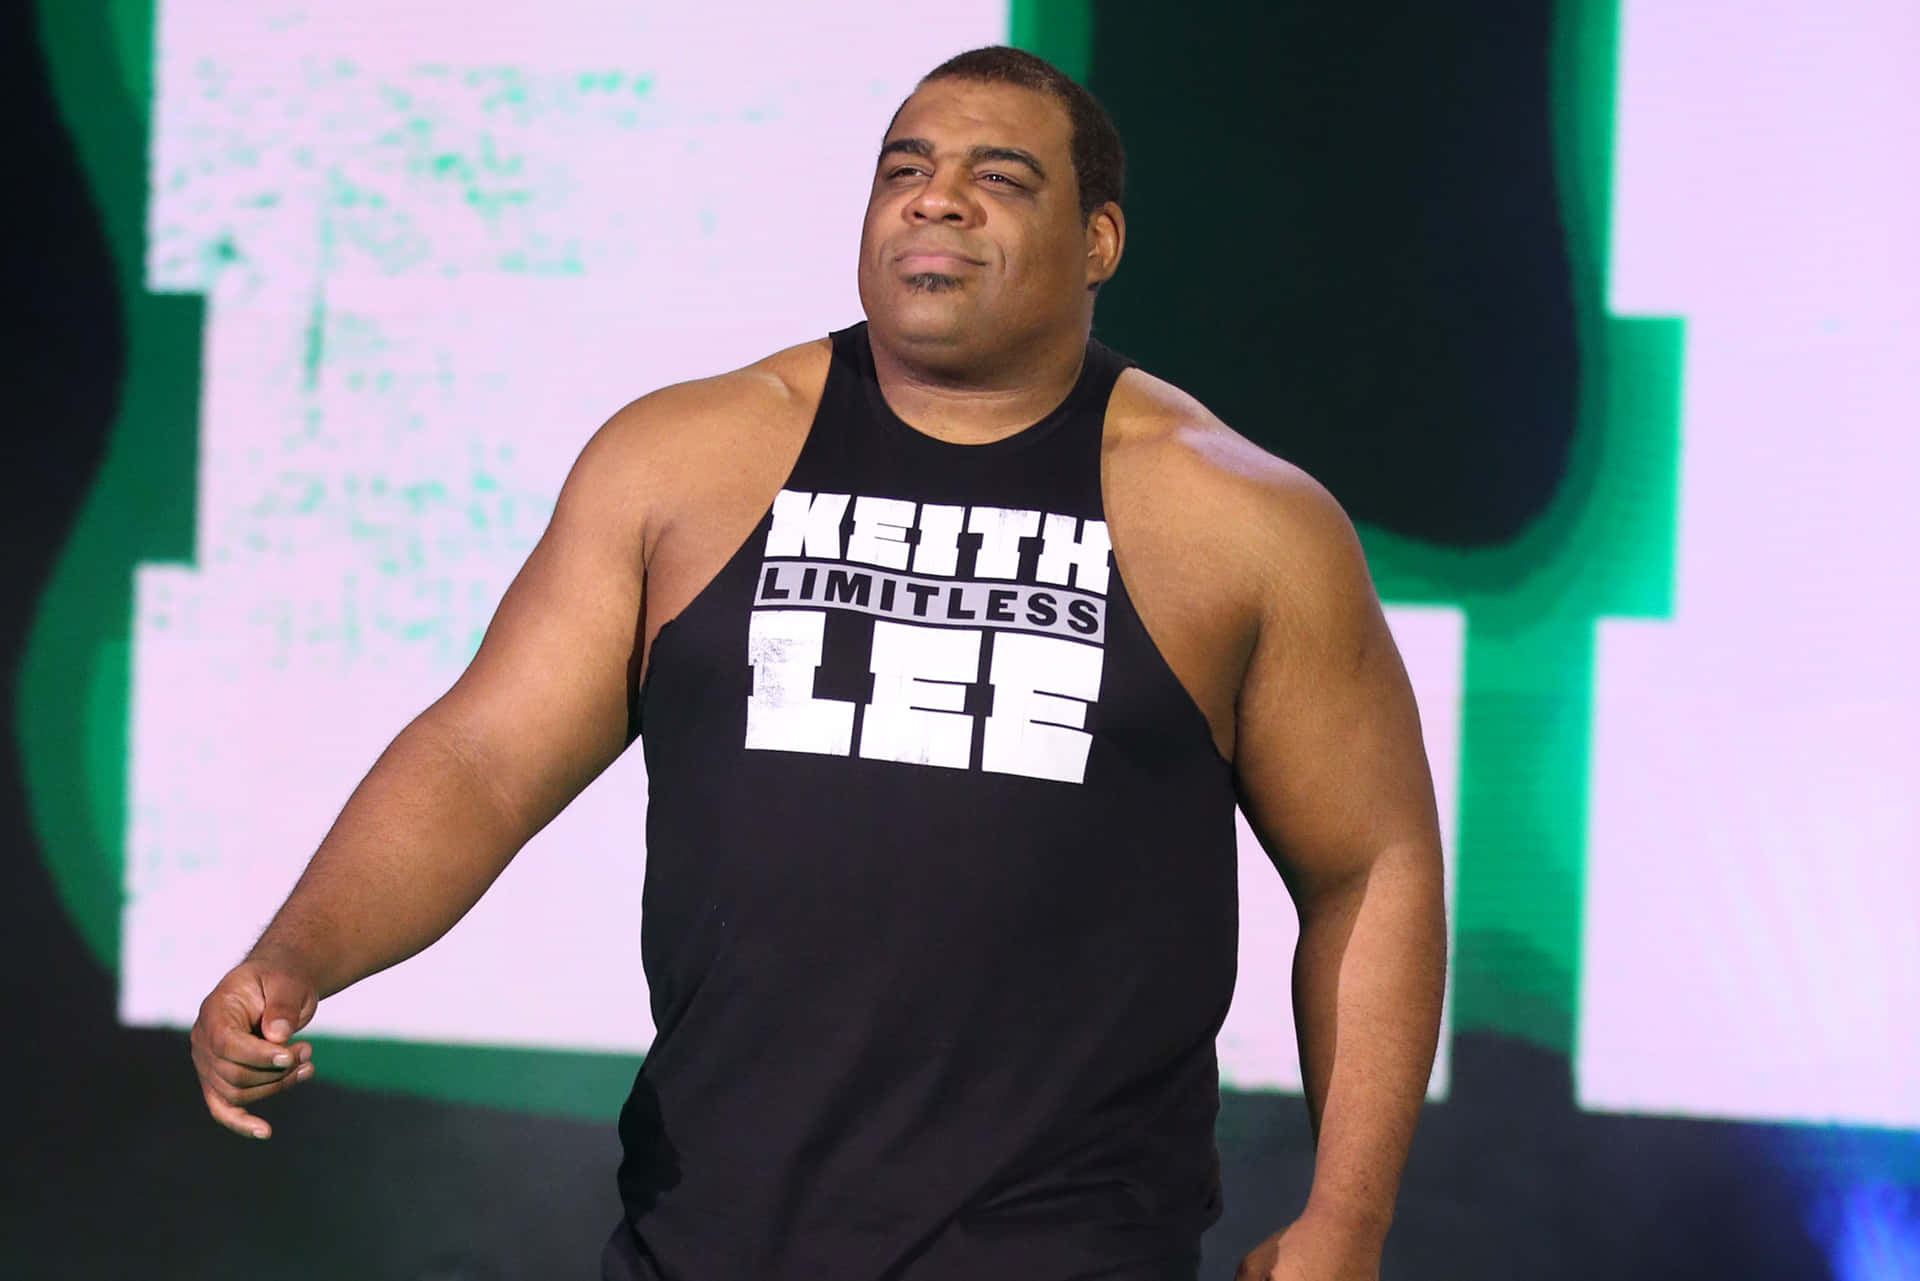 Keith Lee Limitless Black Singlet Aew Picture